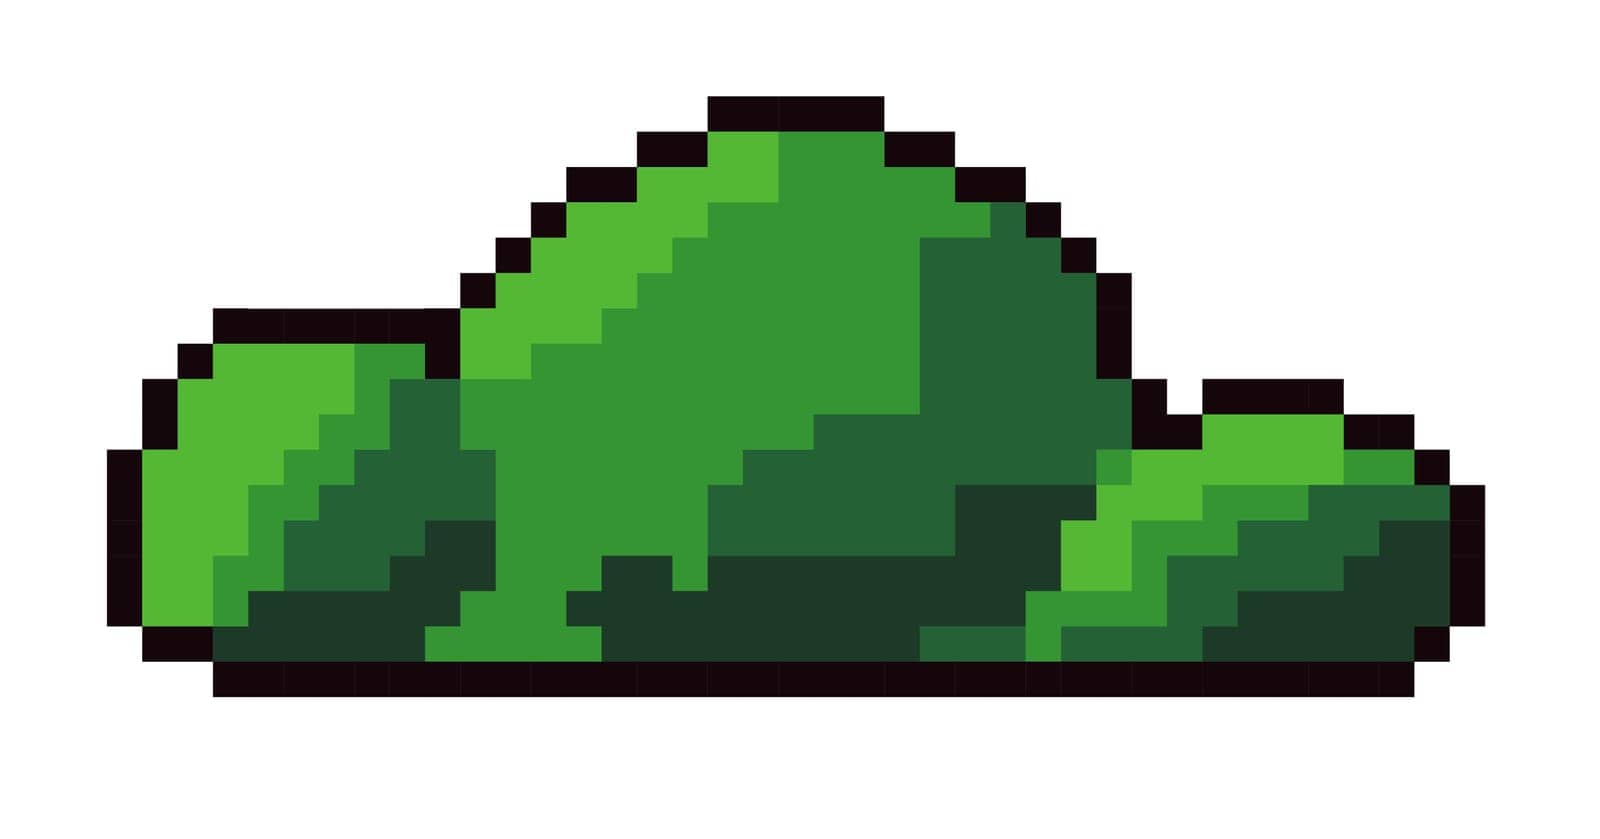 Gaming setting or level details, pixel shrubs or bushes with greenery and foliage. Nature and wilderness of forest. Pixelated isolated icon for 8 bit game, retro design. Vector in flat style